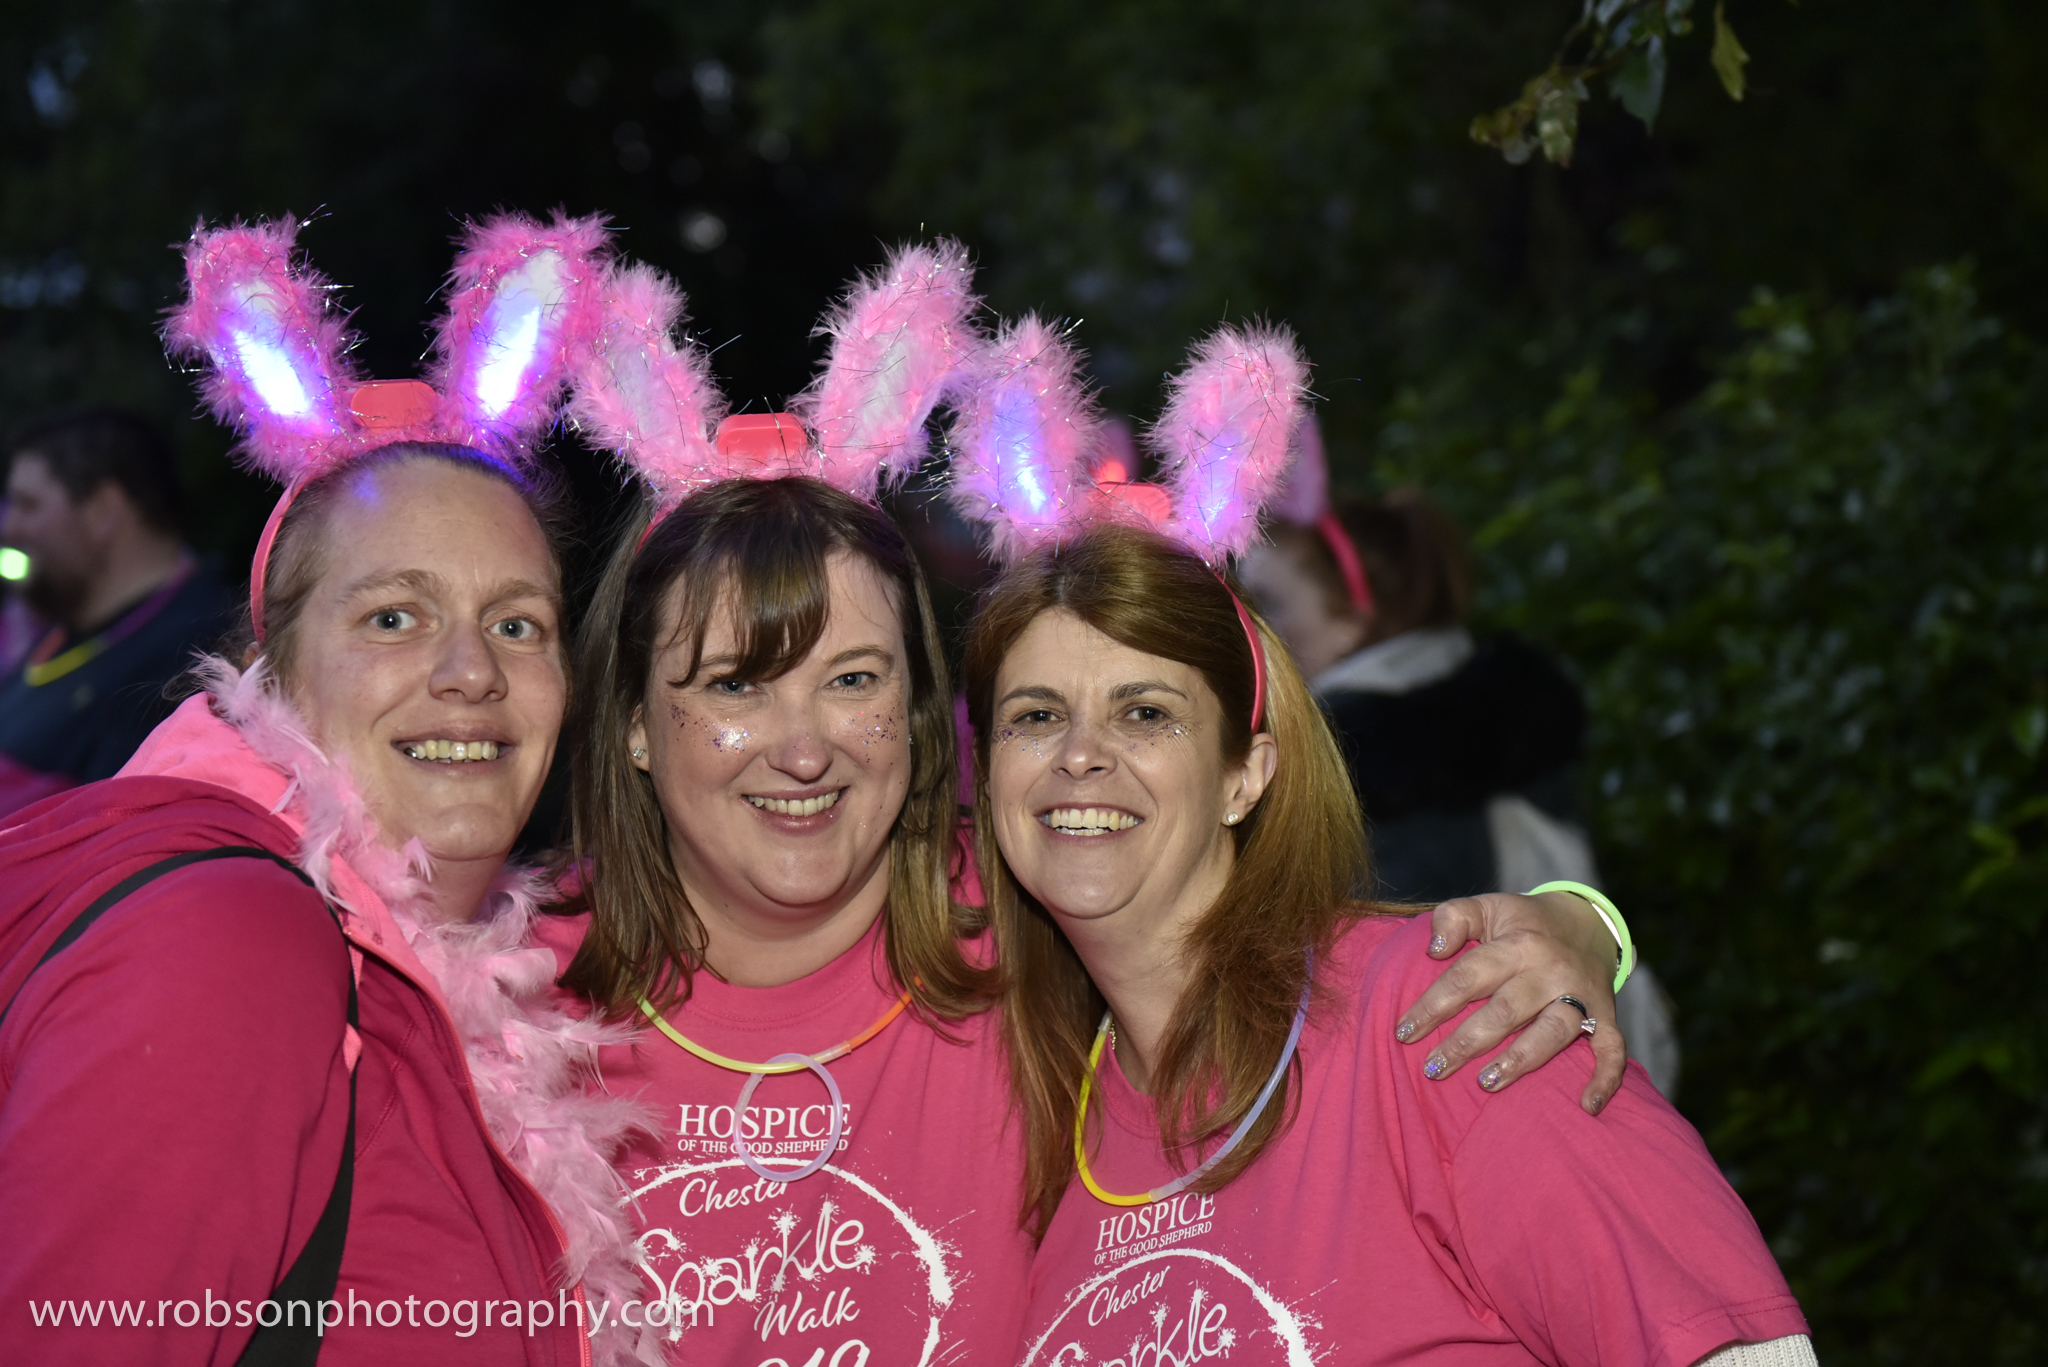 The Chester Sparkle Walk returns for 2021 in aid of the Hospice of the Good Shepherd.